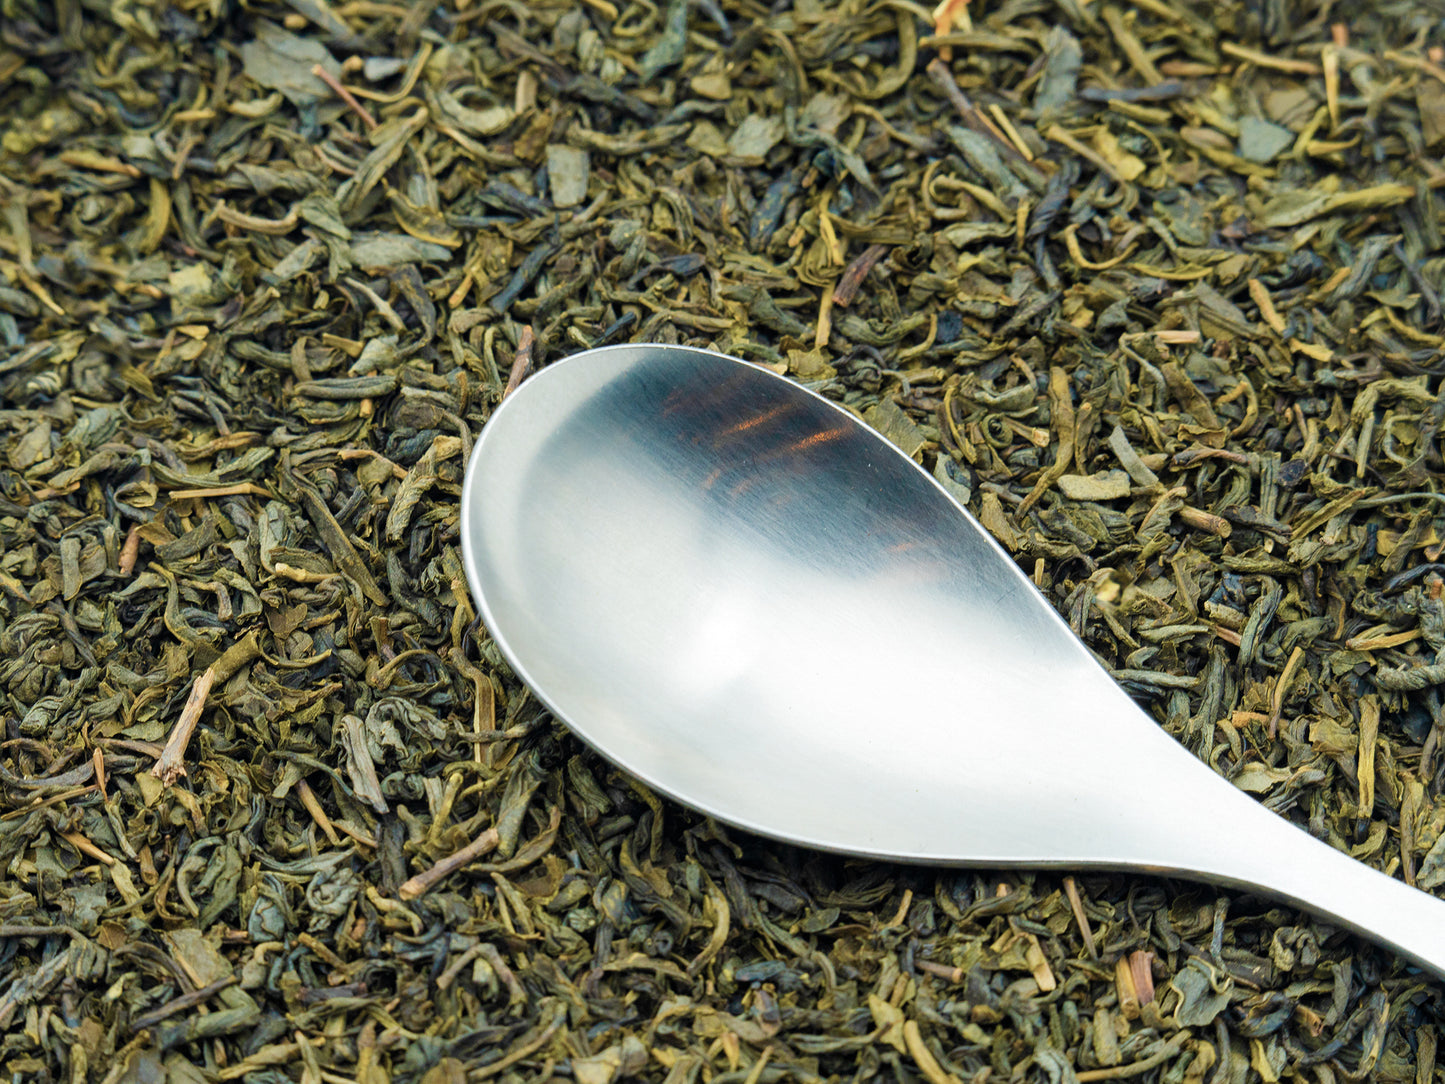 Loose Jasmine Green Tea from TEA23 with a spoon resting on top